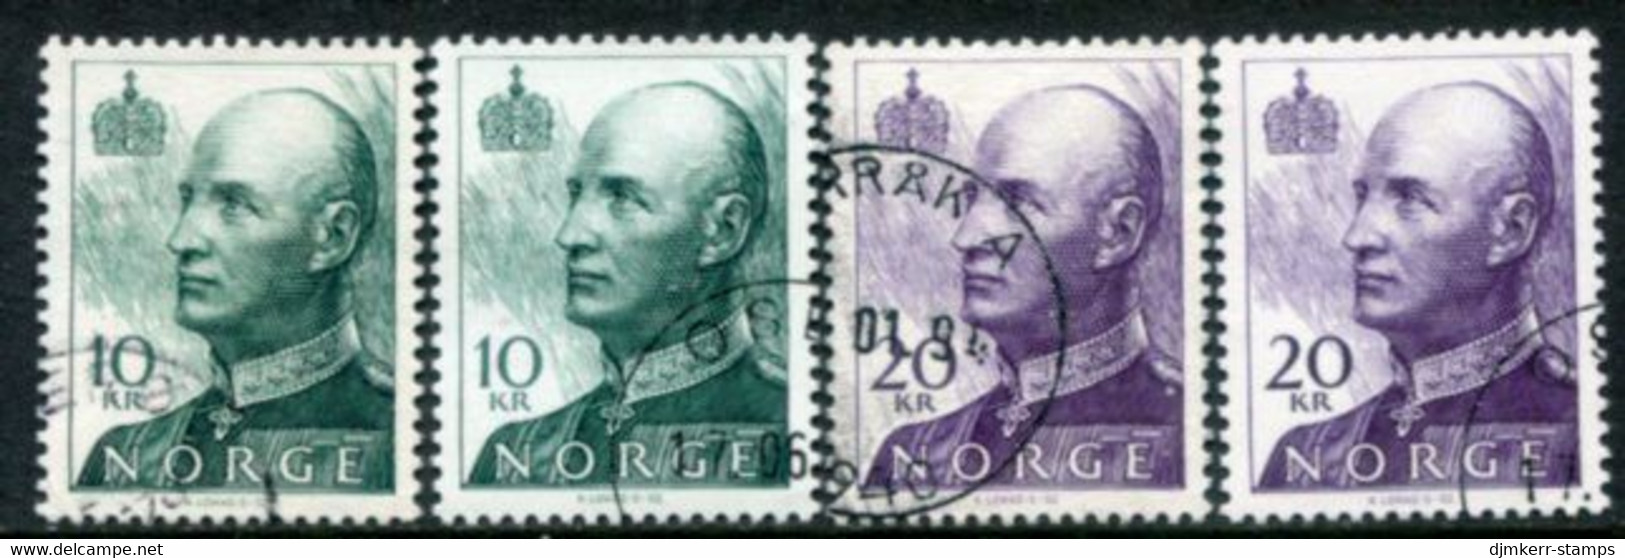 NORWAY 1993) Definitive: King Harald V 10 Kr. 20 Kr. On Ordinary And Phosphor Papers Used.   Michel 1131-32x,y - Oblitérés